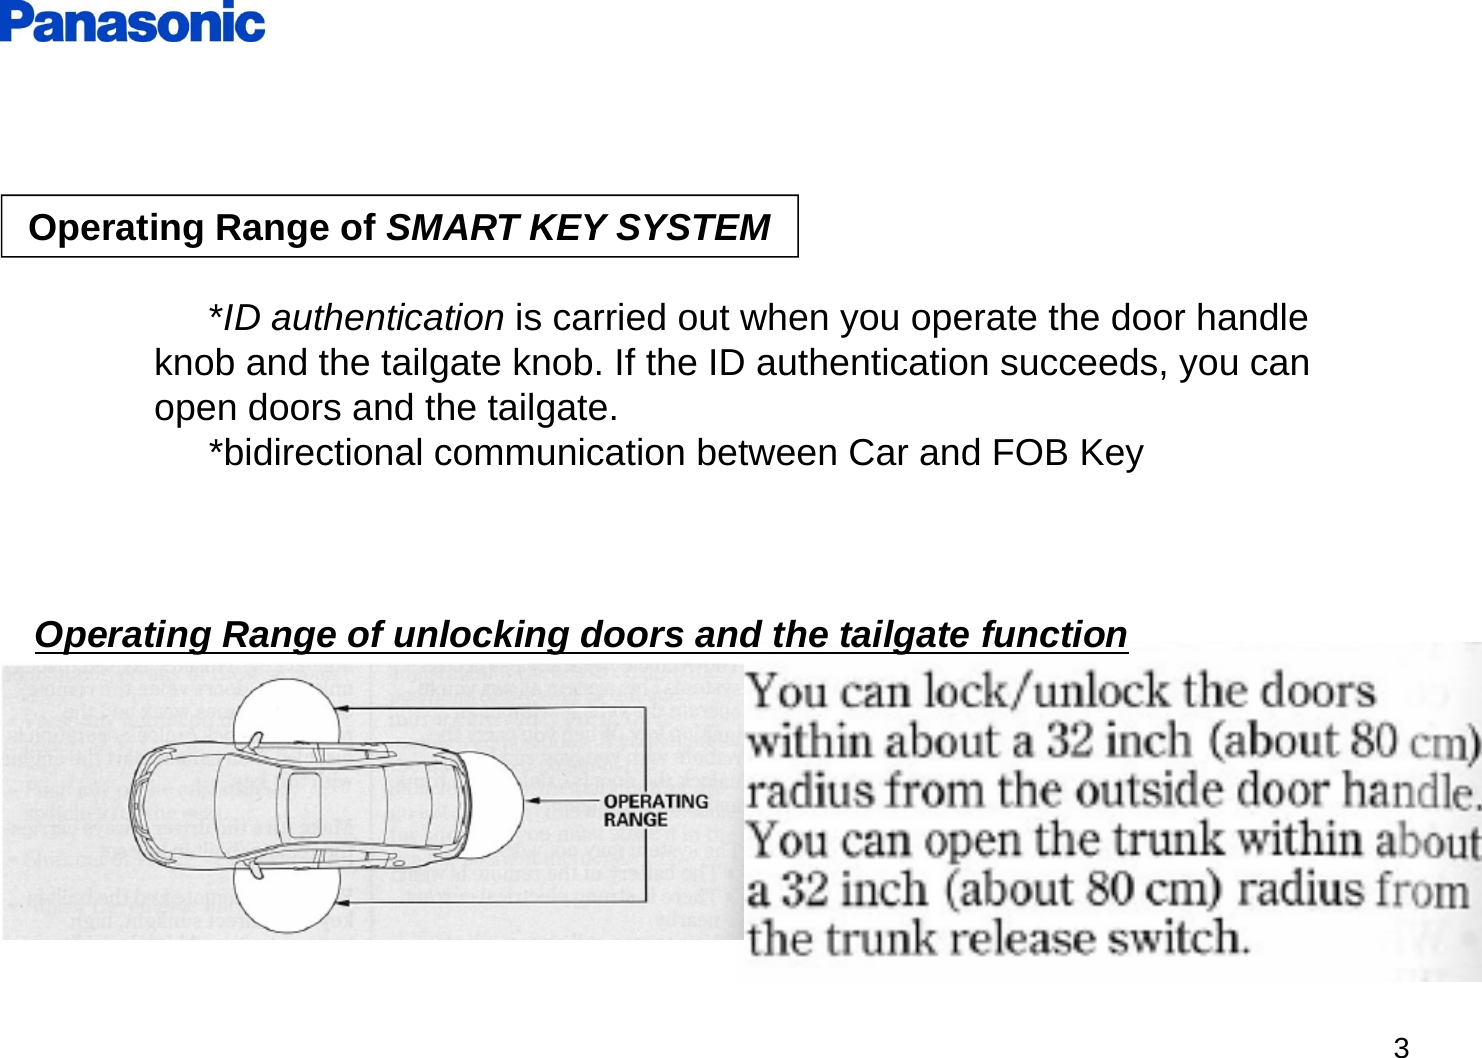 3Operating Range of SMART KEY SYSTEM*ID authentication is carried out when you operate the door handle knob and the tailgate knob. If the ID authentication succeeds, you can open doors and the tailgate.*bidirectional communication between Car and FOB KeyOperating Range of unlocking doors and the tailgate function